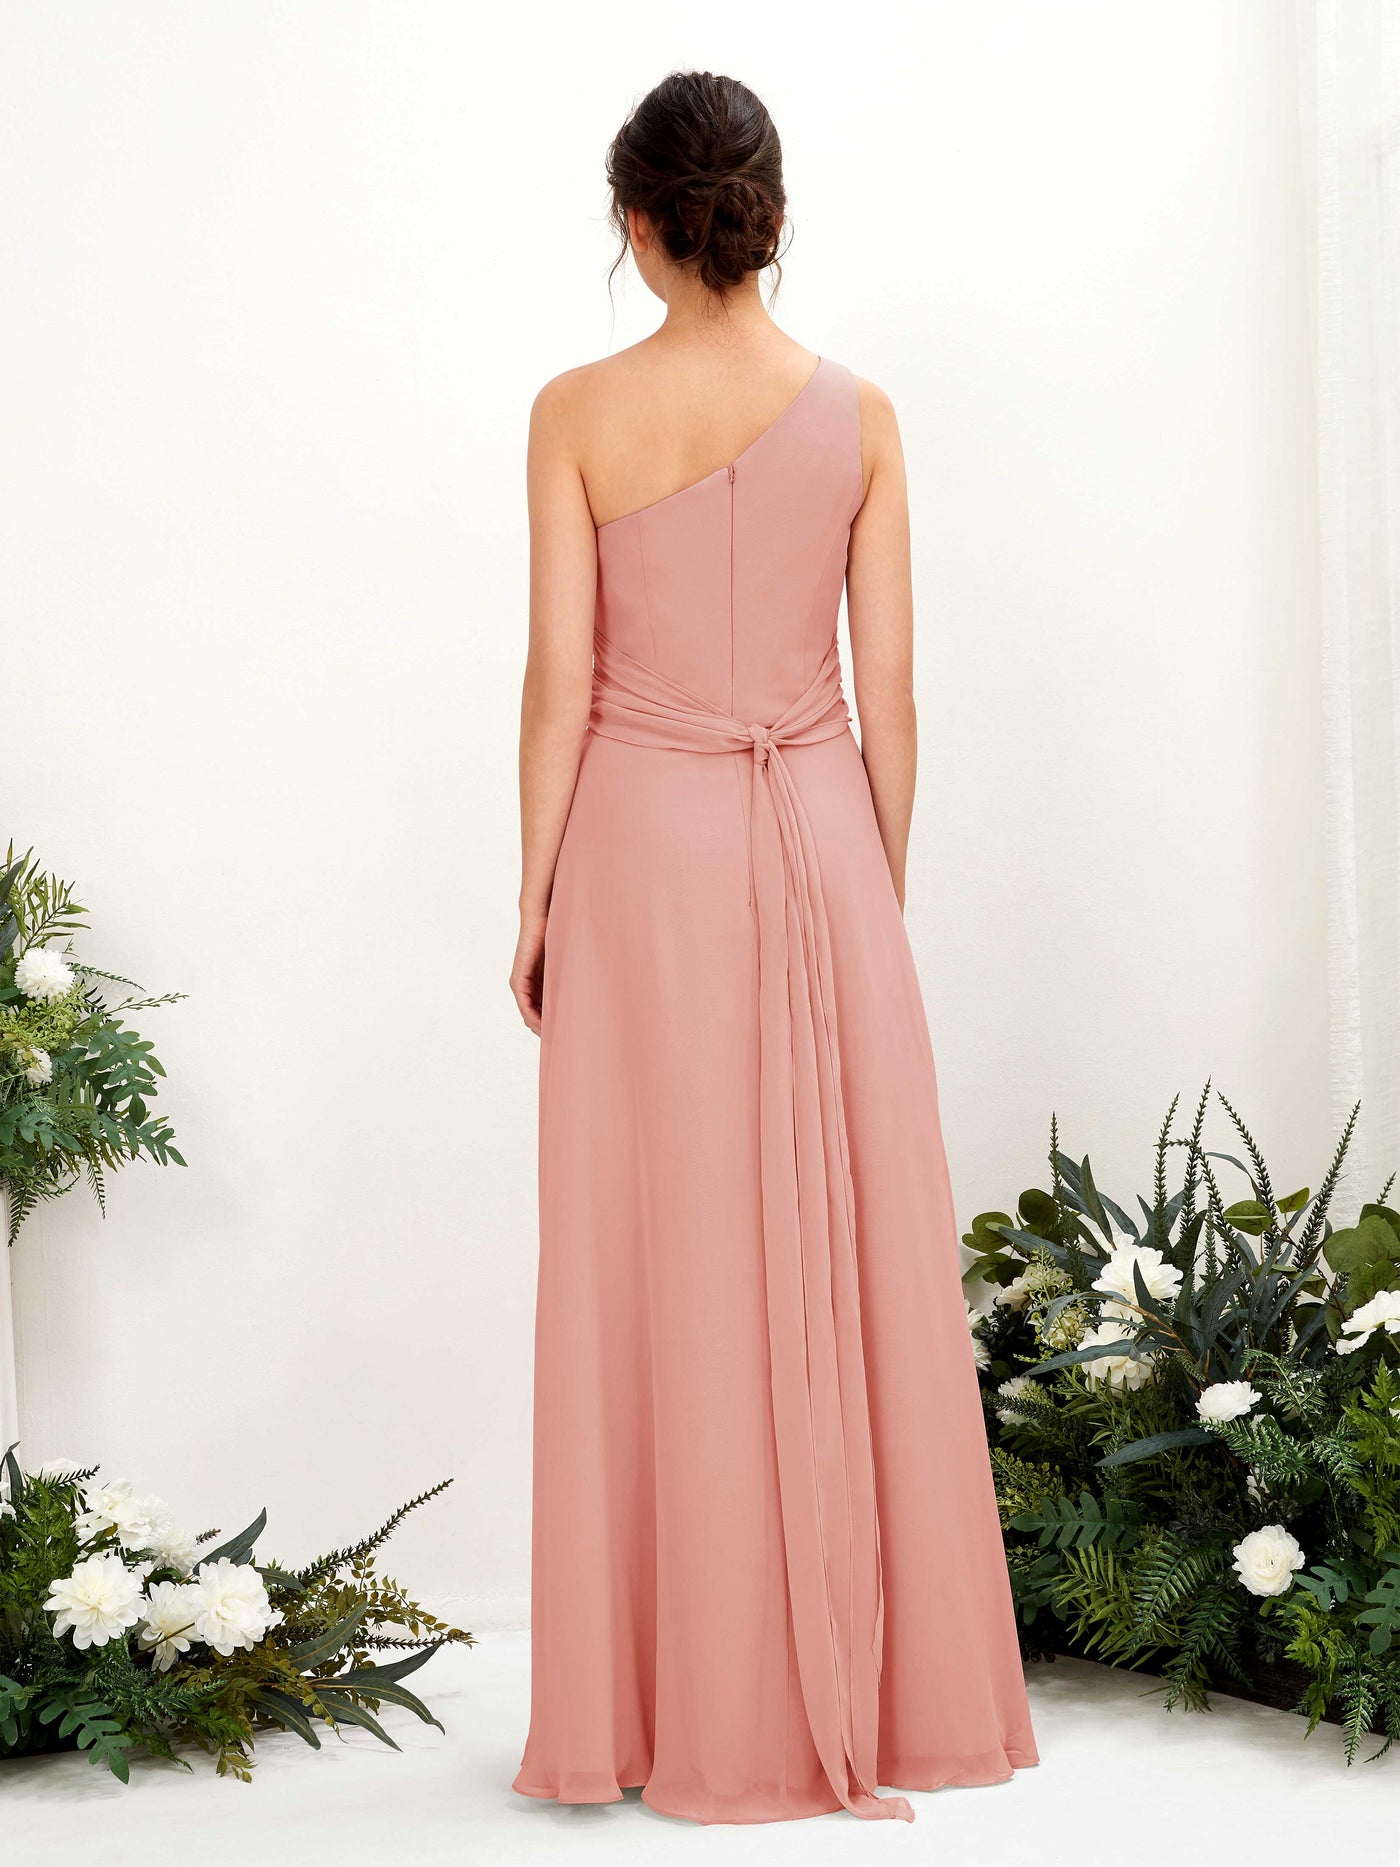 Champagne Rose Bridesmaid Dresses Bridesmaid Dress A-line Chiffon One Shoulder Full Length Sleeveless Wedding Party Dress (81224706)#color_champagne-rose